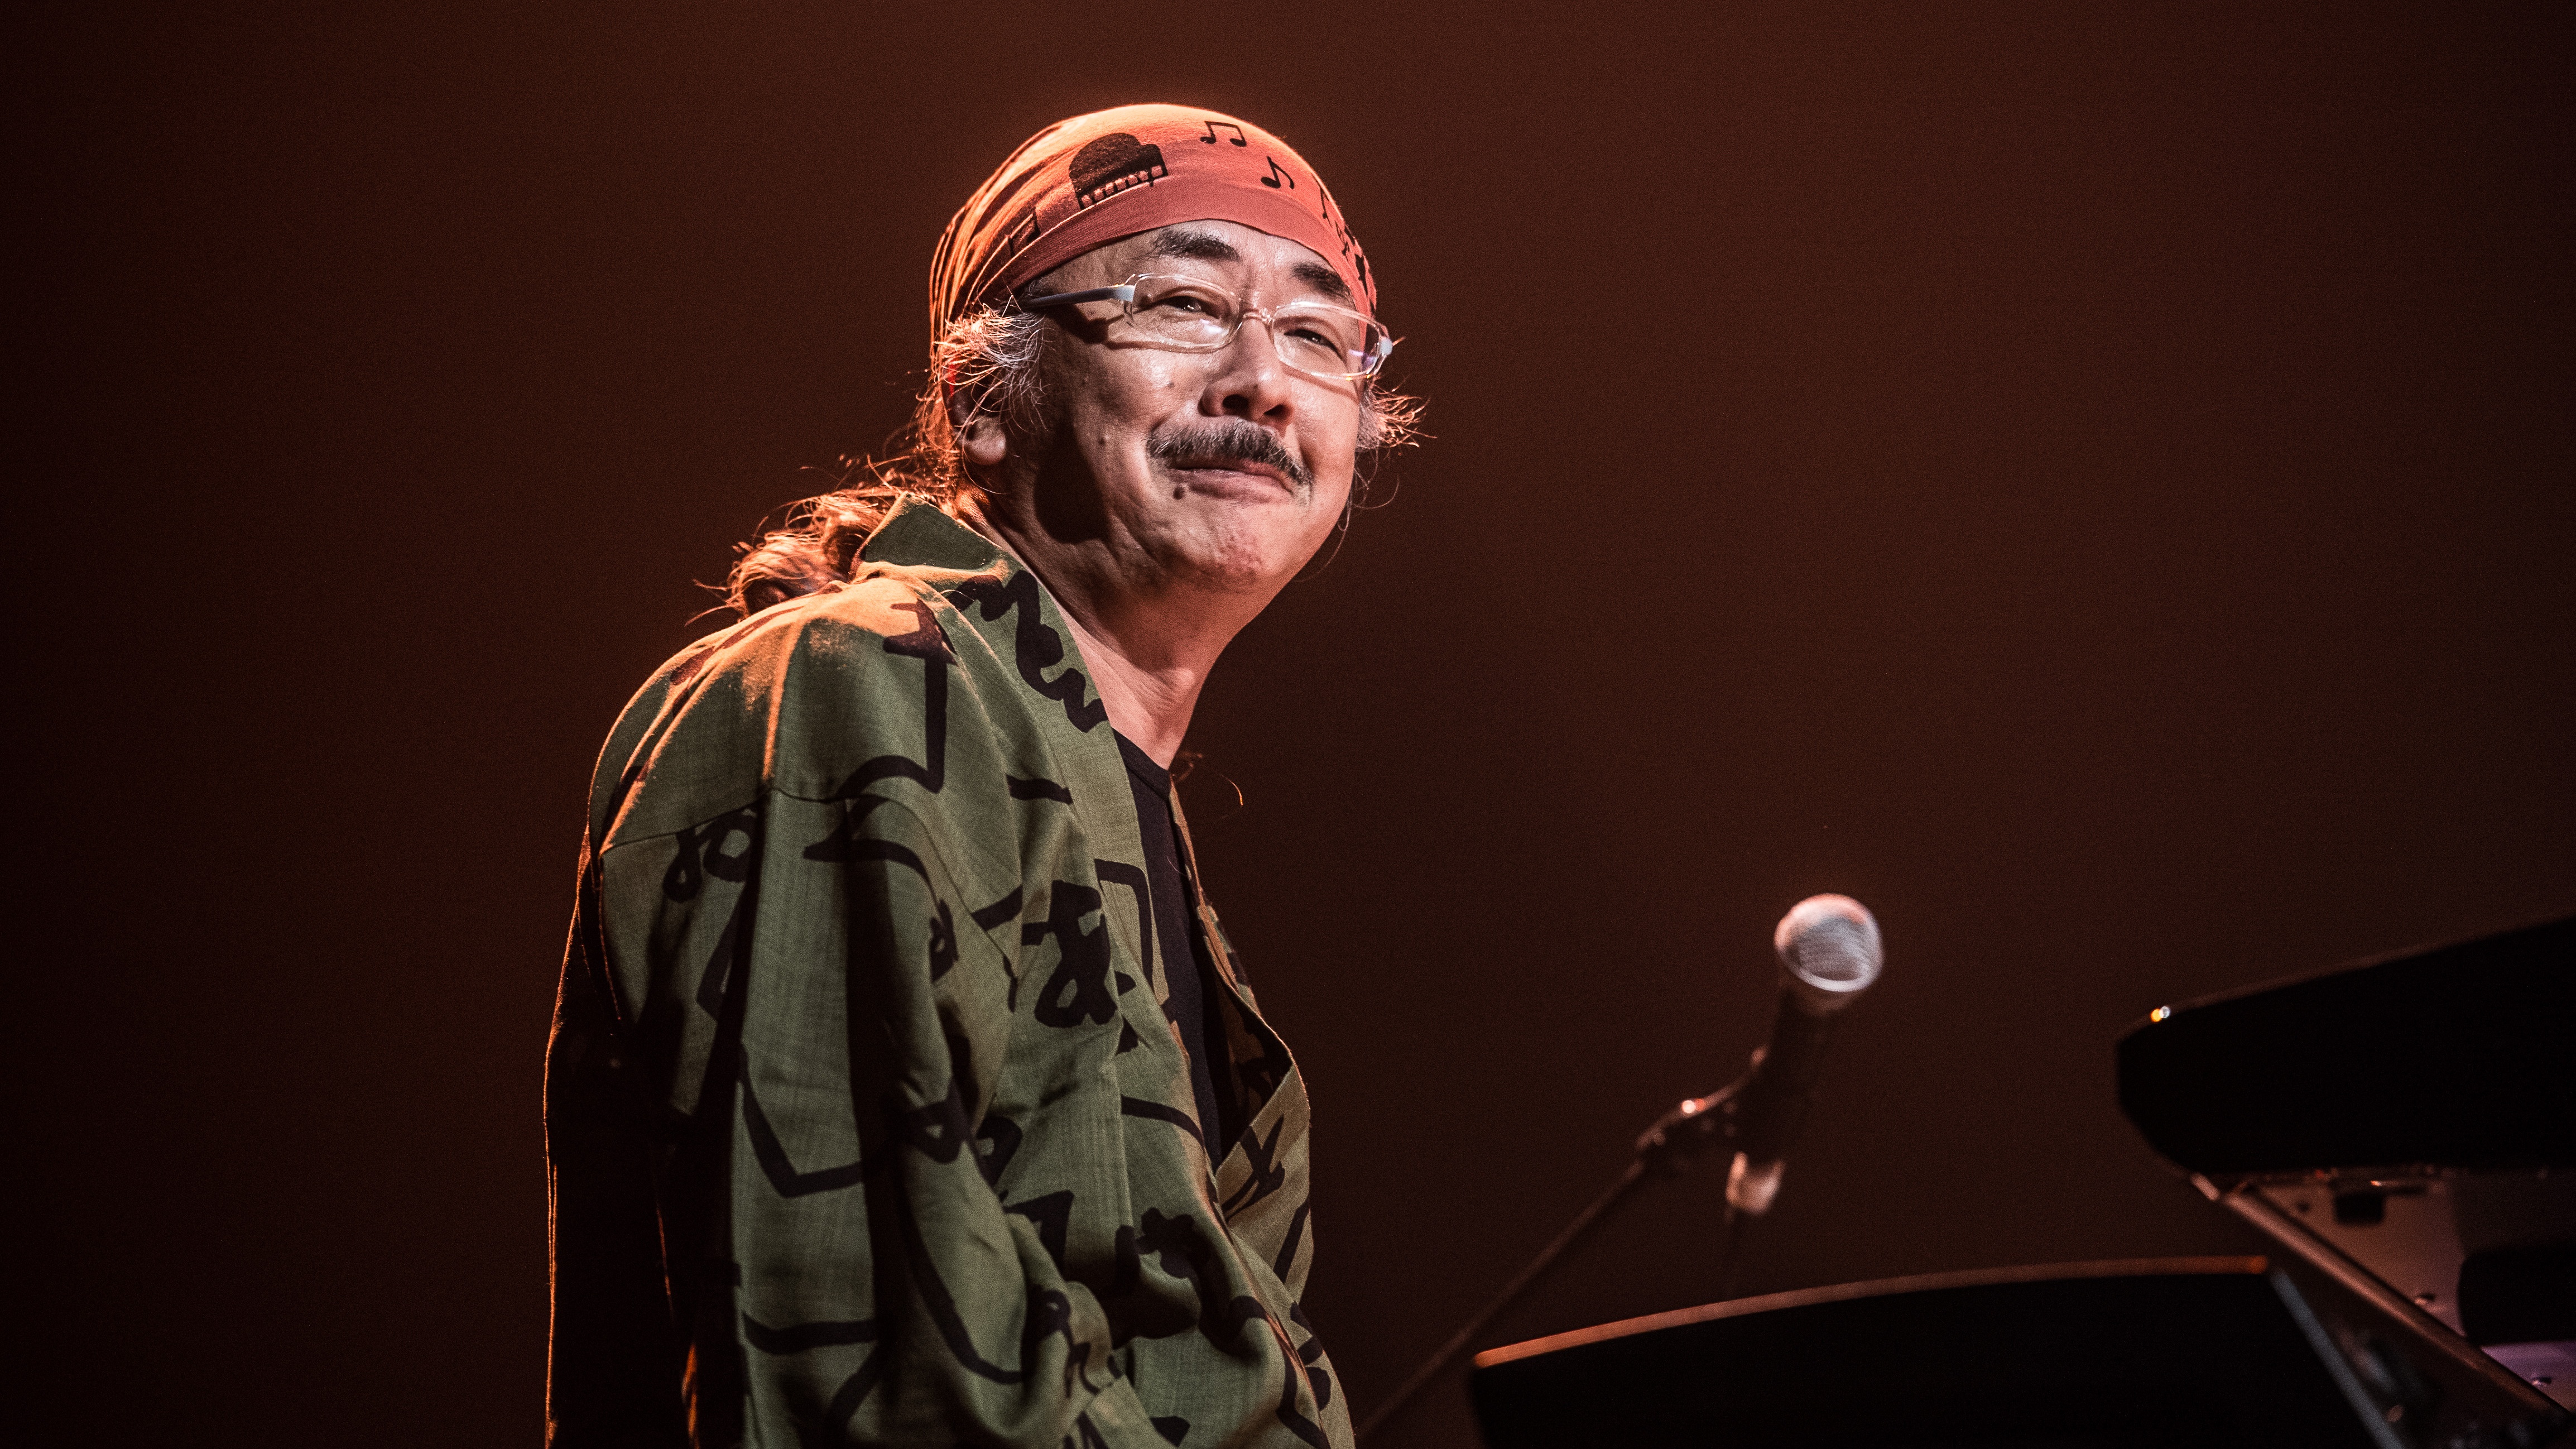  Legendary Final Fantasy composer Nobuo Uematsu doesn't 'have the physical and mental strength' to create full game soundtracks anymore: 'I'd rather use the time I have left to work on other projects I love' 